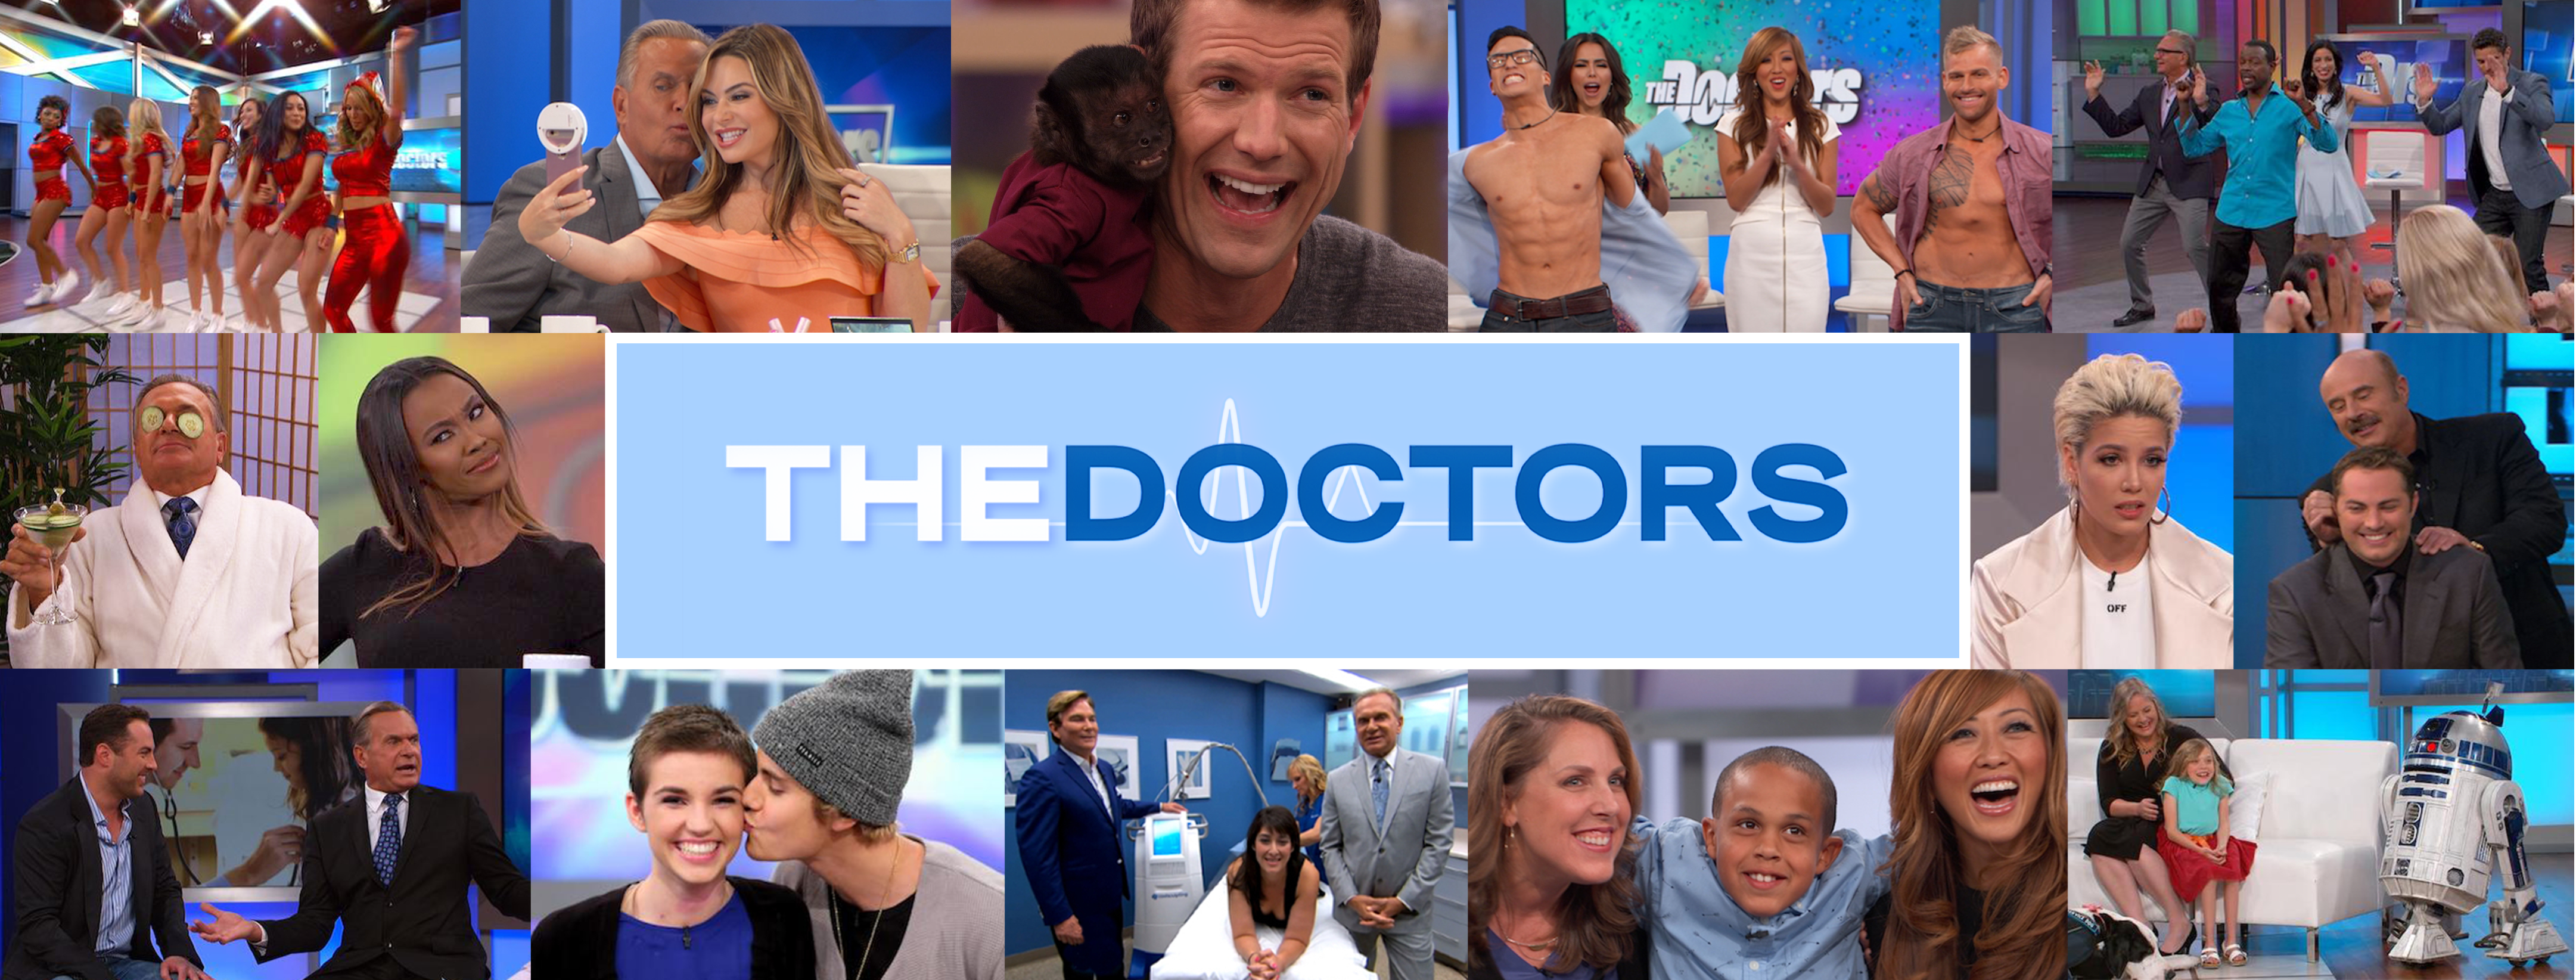 Battle Of The Sexes The Doctors Tv Show